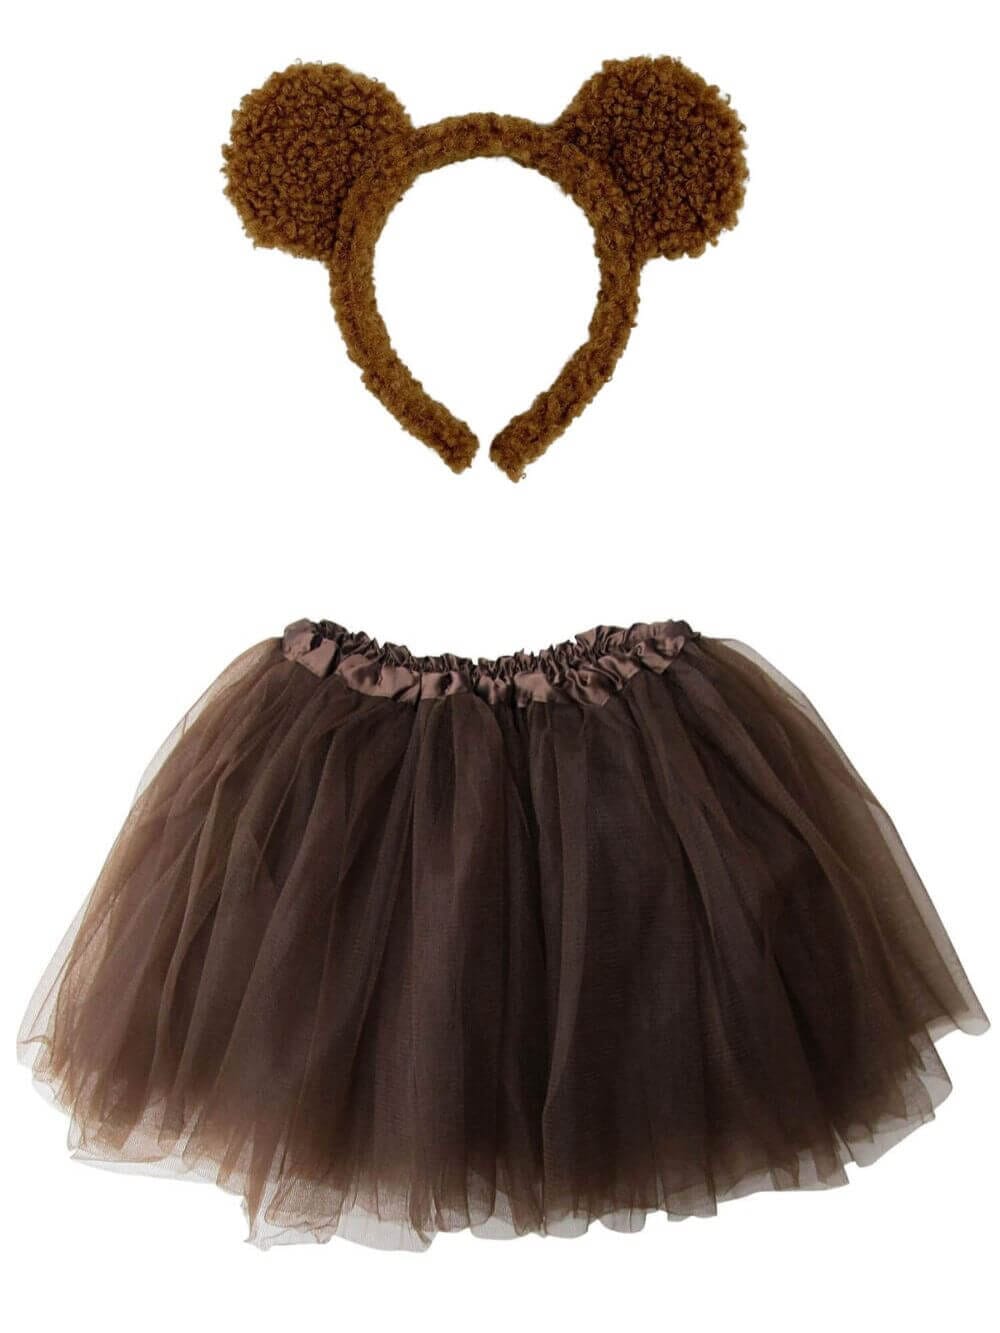 Brown Bear Costume - Complete Kids Costume Set with Tutu and Headband - Sydney So Sweet